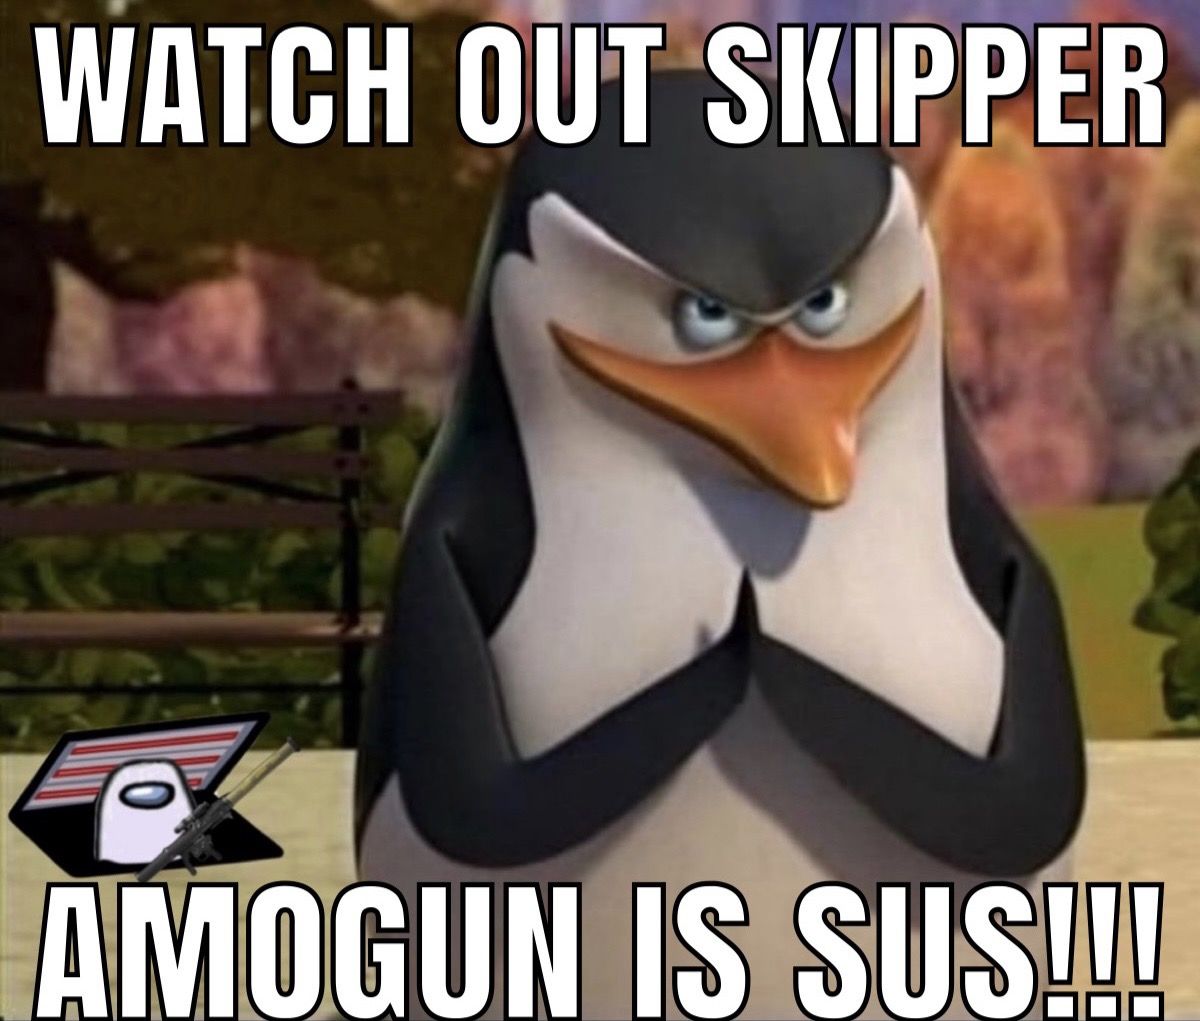 SKIPPER’S “Wouldn’t that make you gay?!” IS YOUR 2021 FEB MEME OF THE MONTH